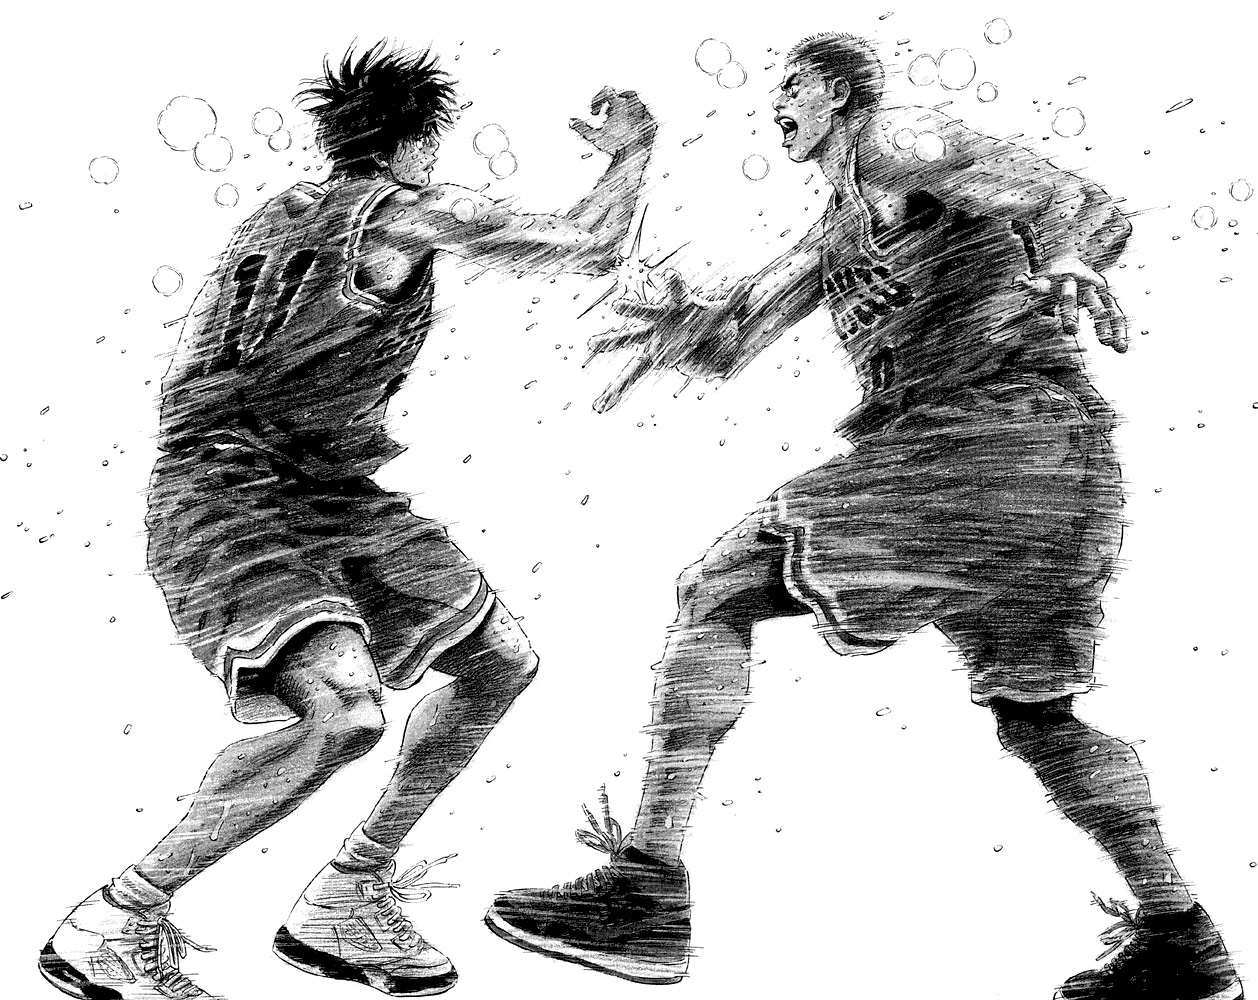 Slam Dunk Chapter 276 Discussion (50 - ) - Forums 